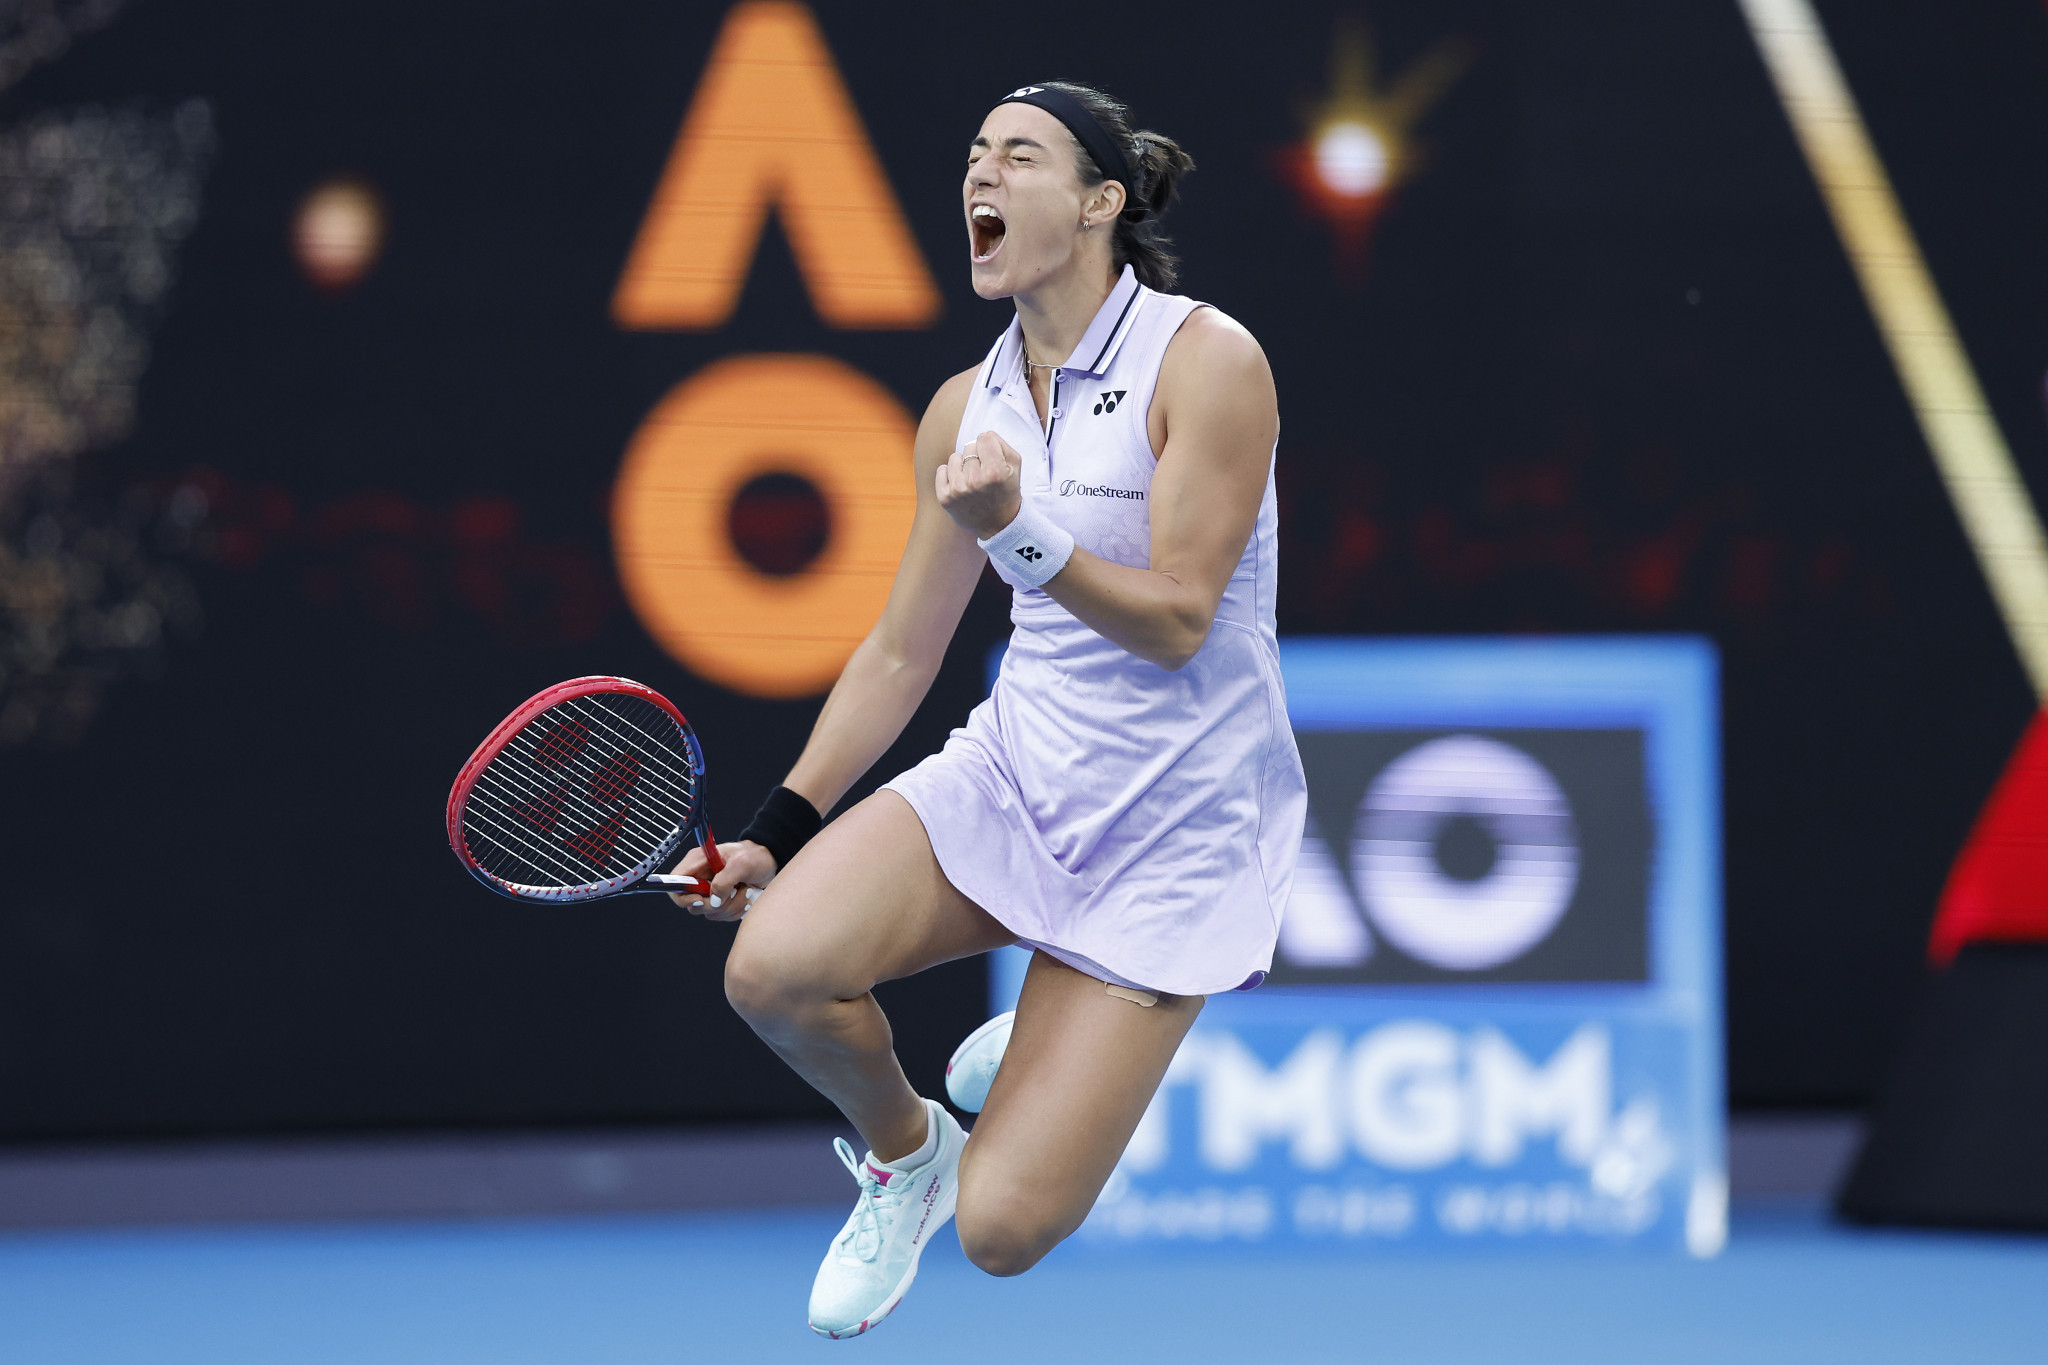 Caroline Garcia of France overcame Canada's Leylah Fernandez 7-6, 7-5 to reach the third round ©Getty Images